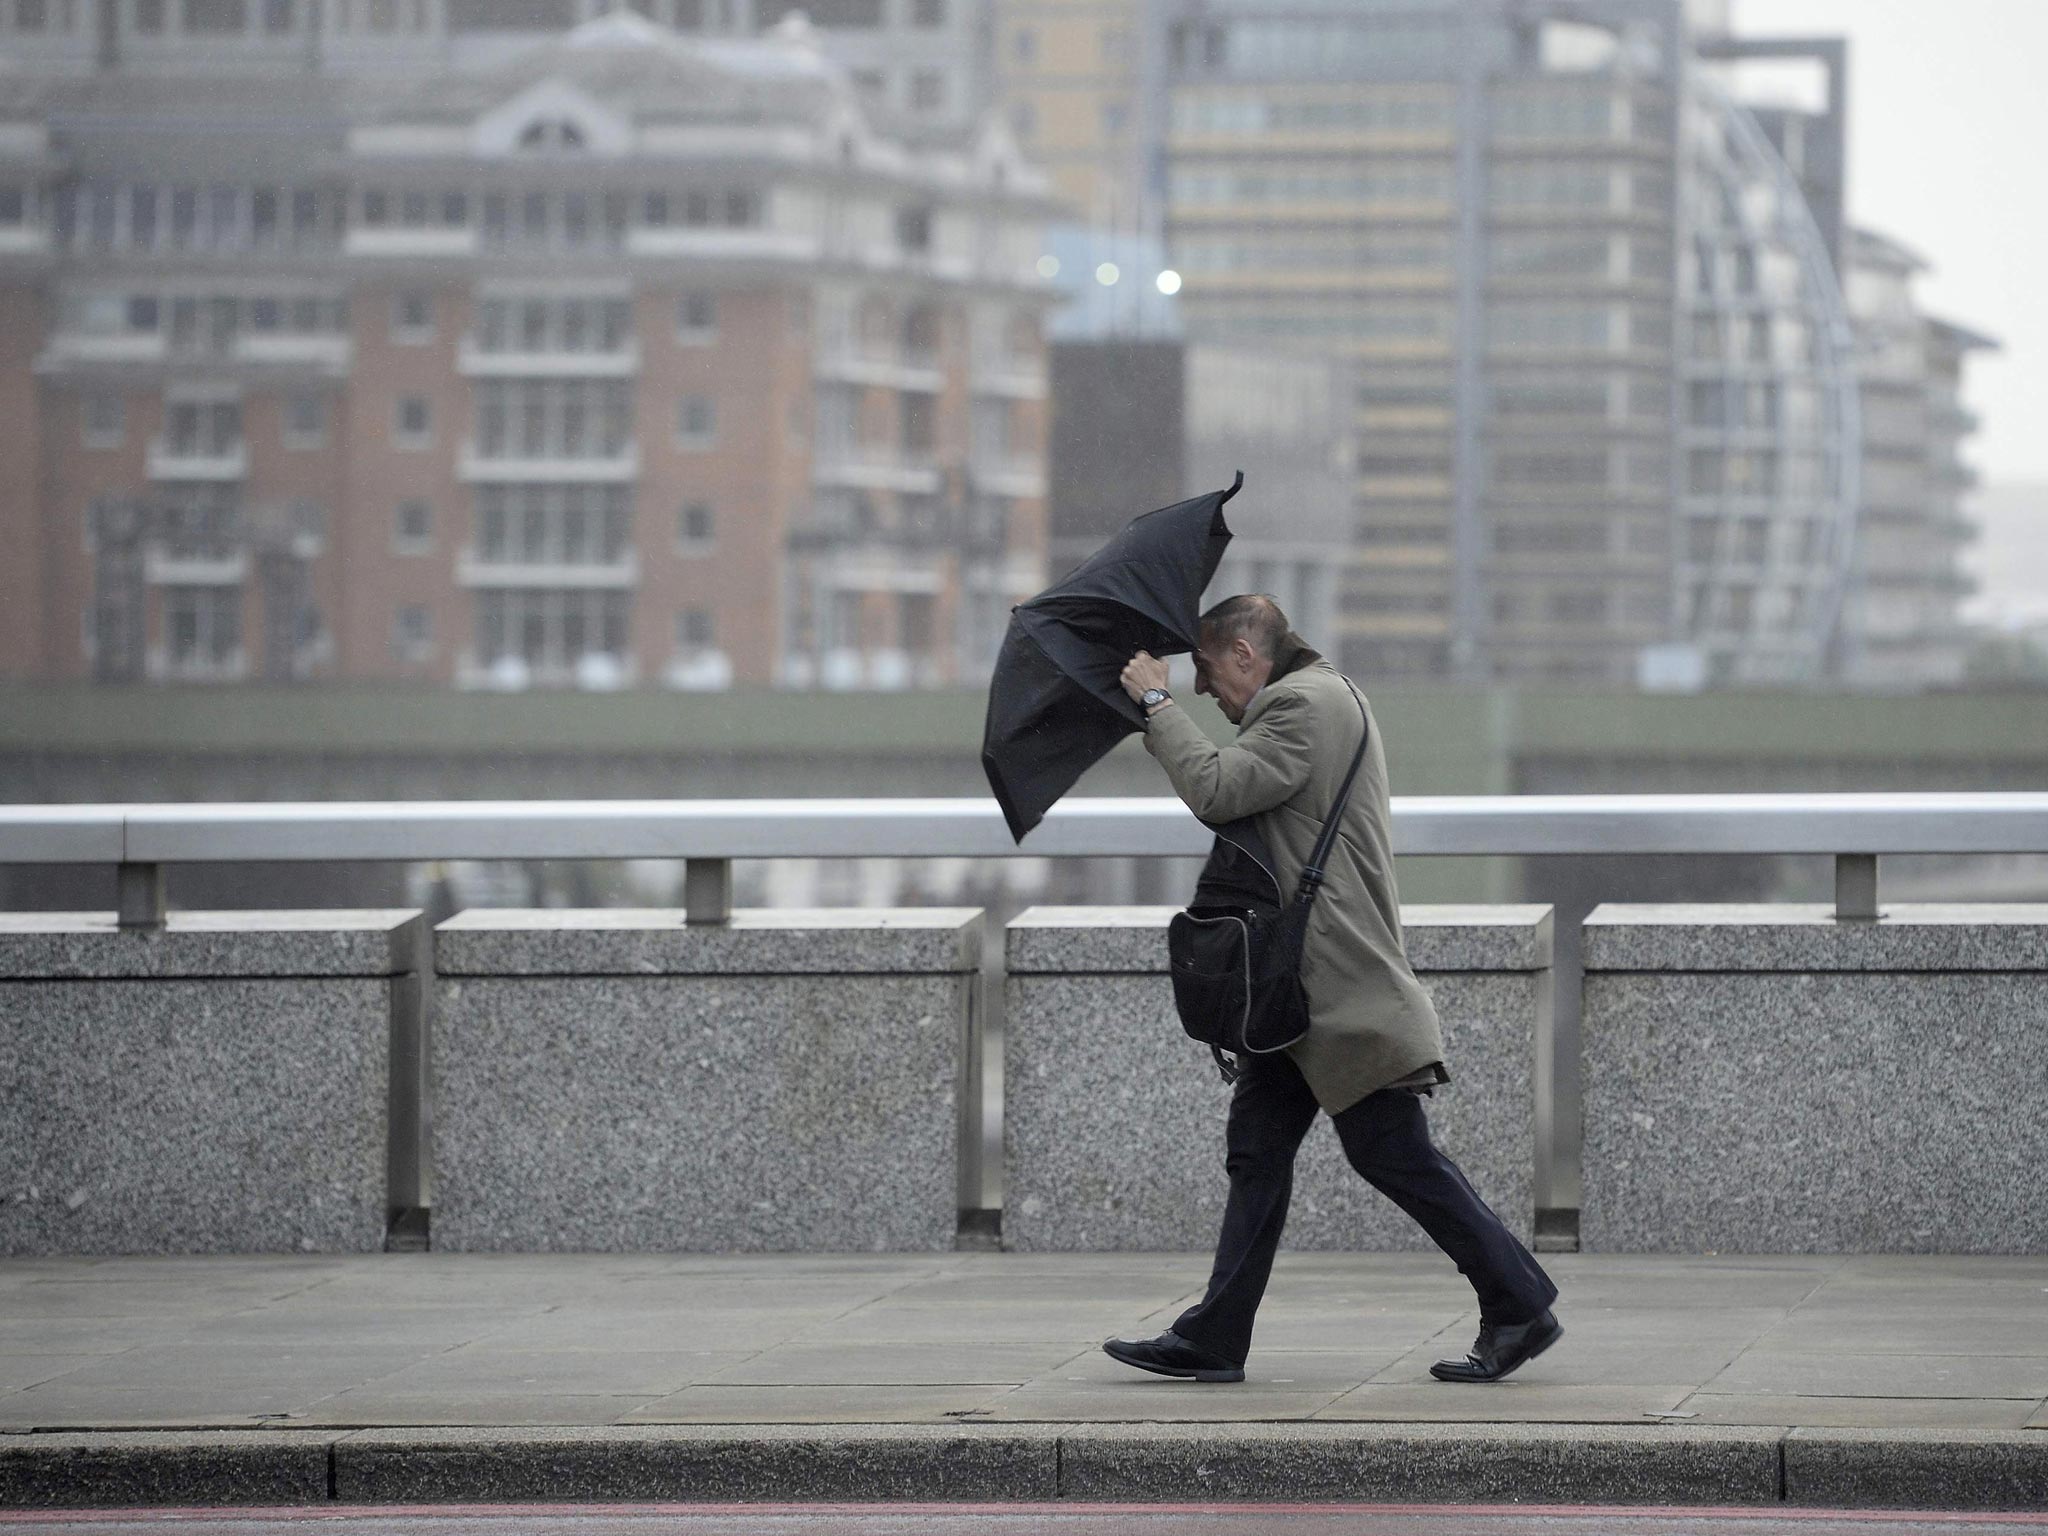 More stormy weather is set to blow over the country